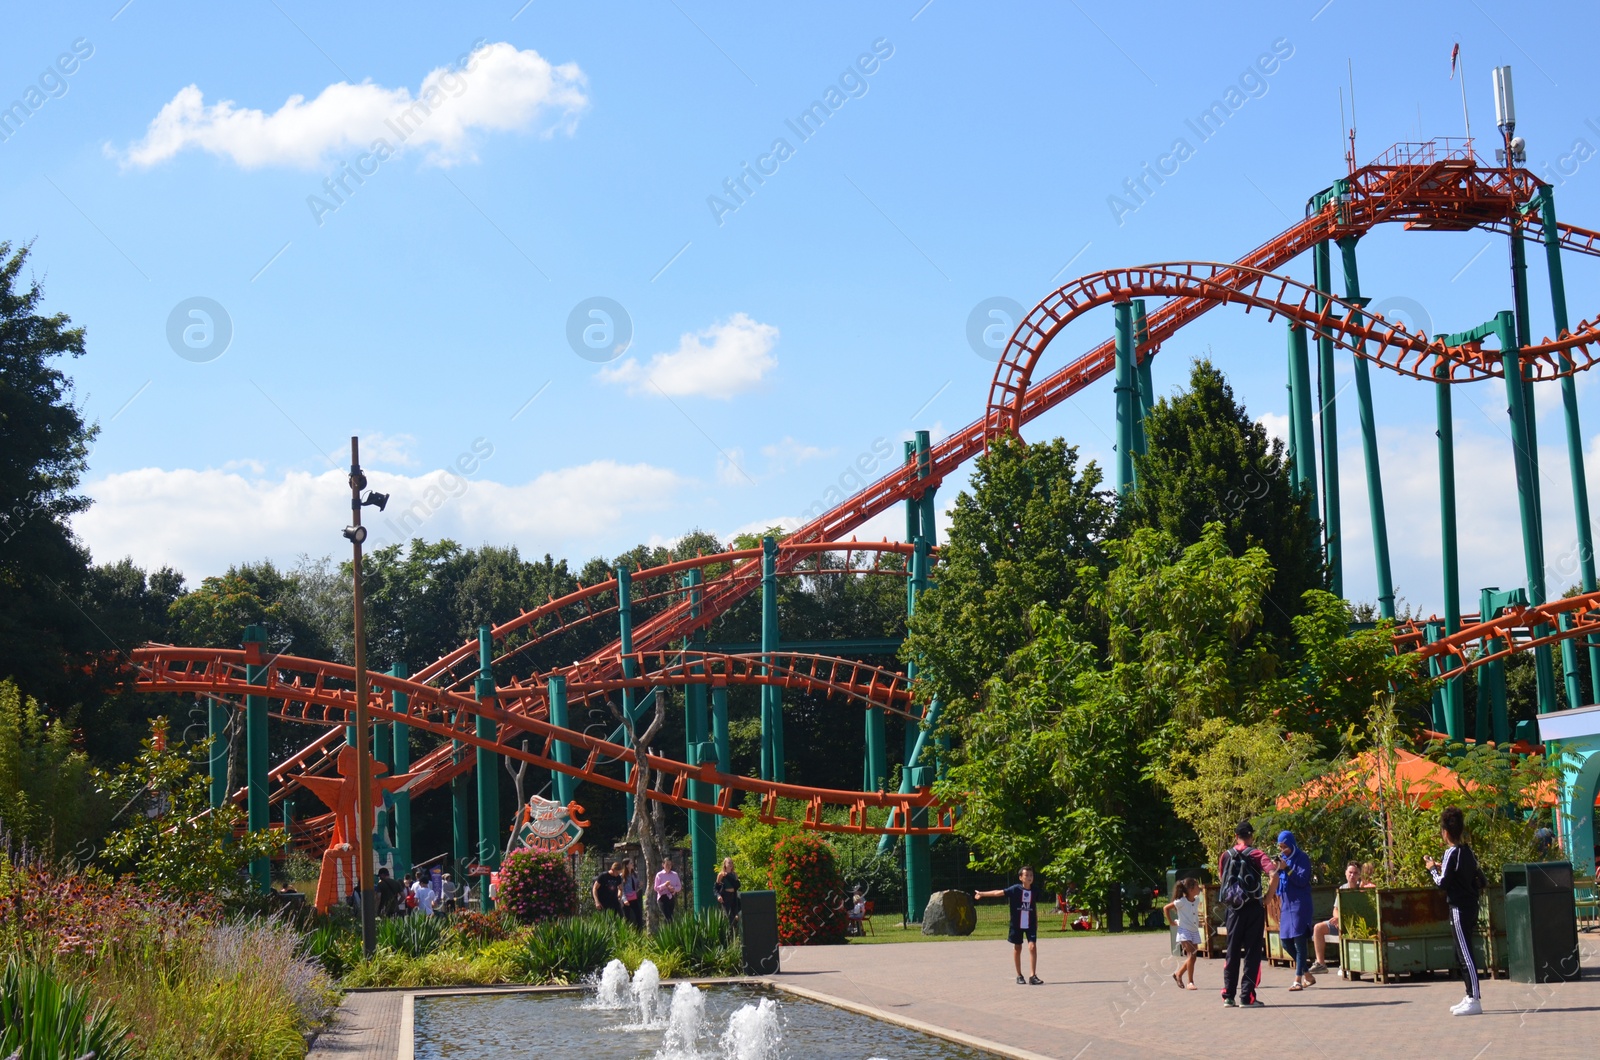 Photo of Amsterdam, The Netherlands - August 8, 2022: Large colorful rollercoaster and people walking in Walibi Holland amusement park